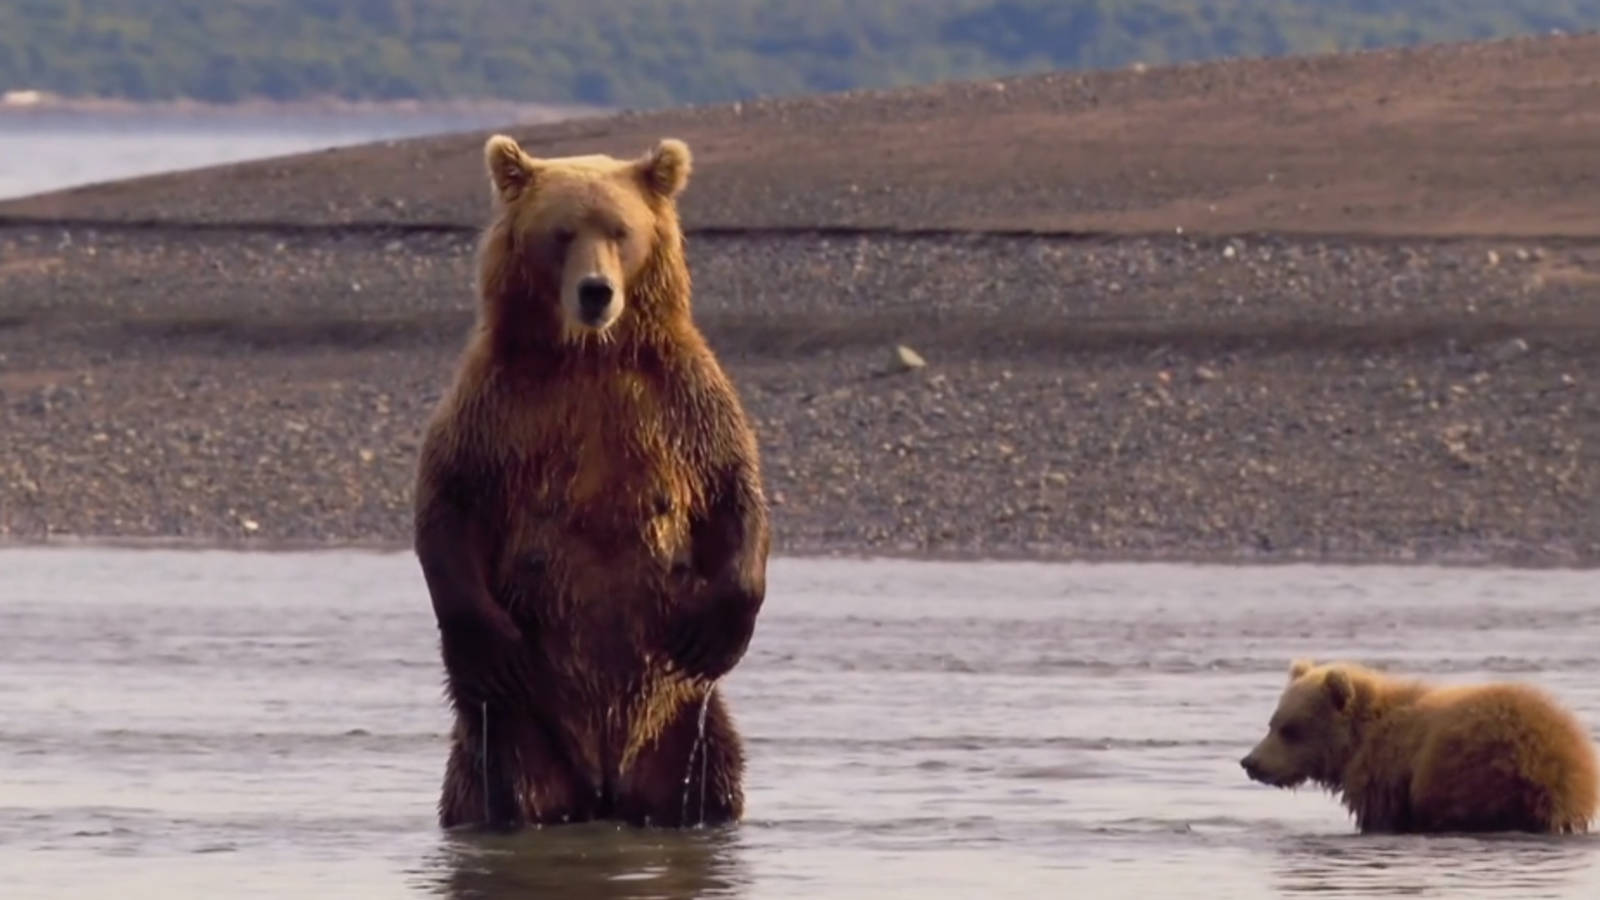 Bart the Bear - Grizzly bear conservation and protection